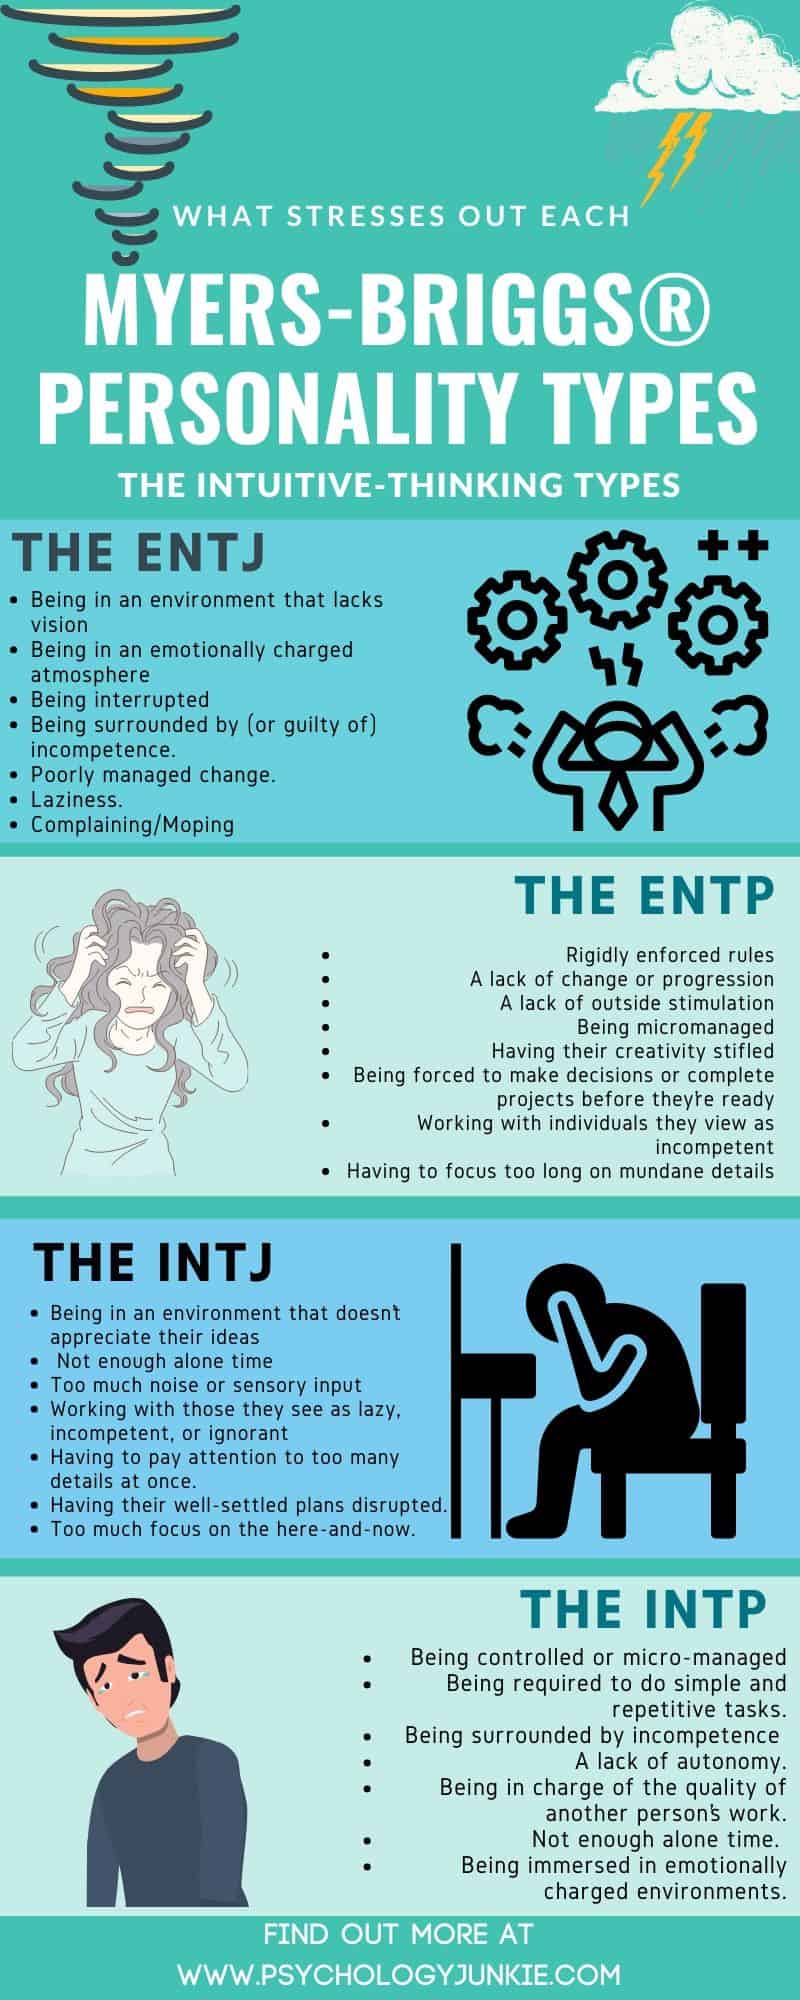 Find out what creates stress for each of the Intuitive-Thinking personality types. #MBTI #Personality #INTJ #INTP